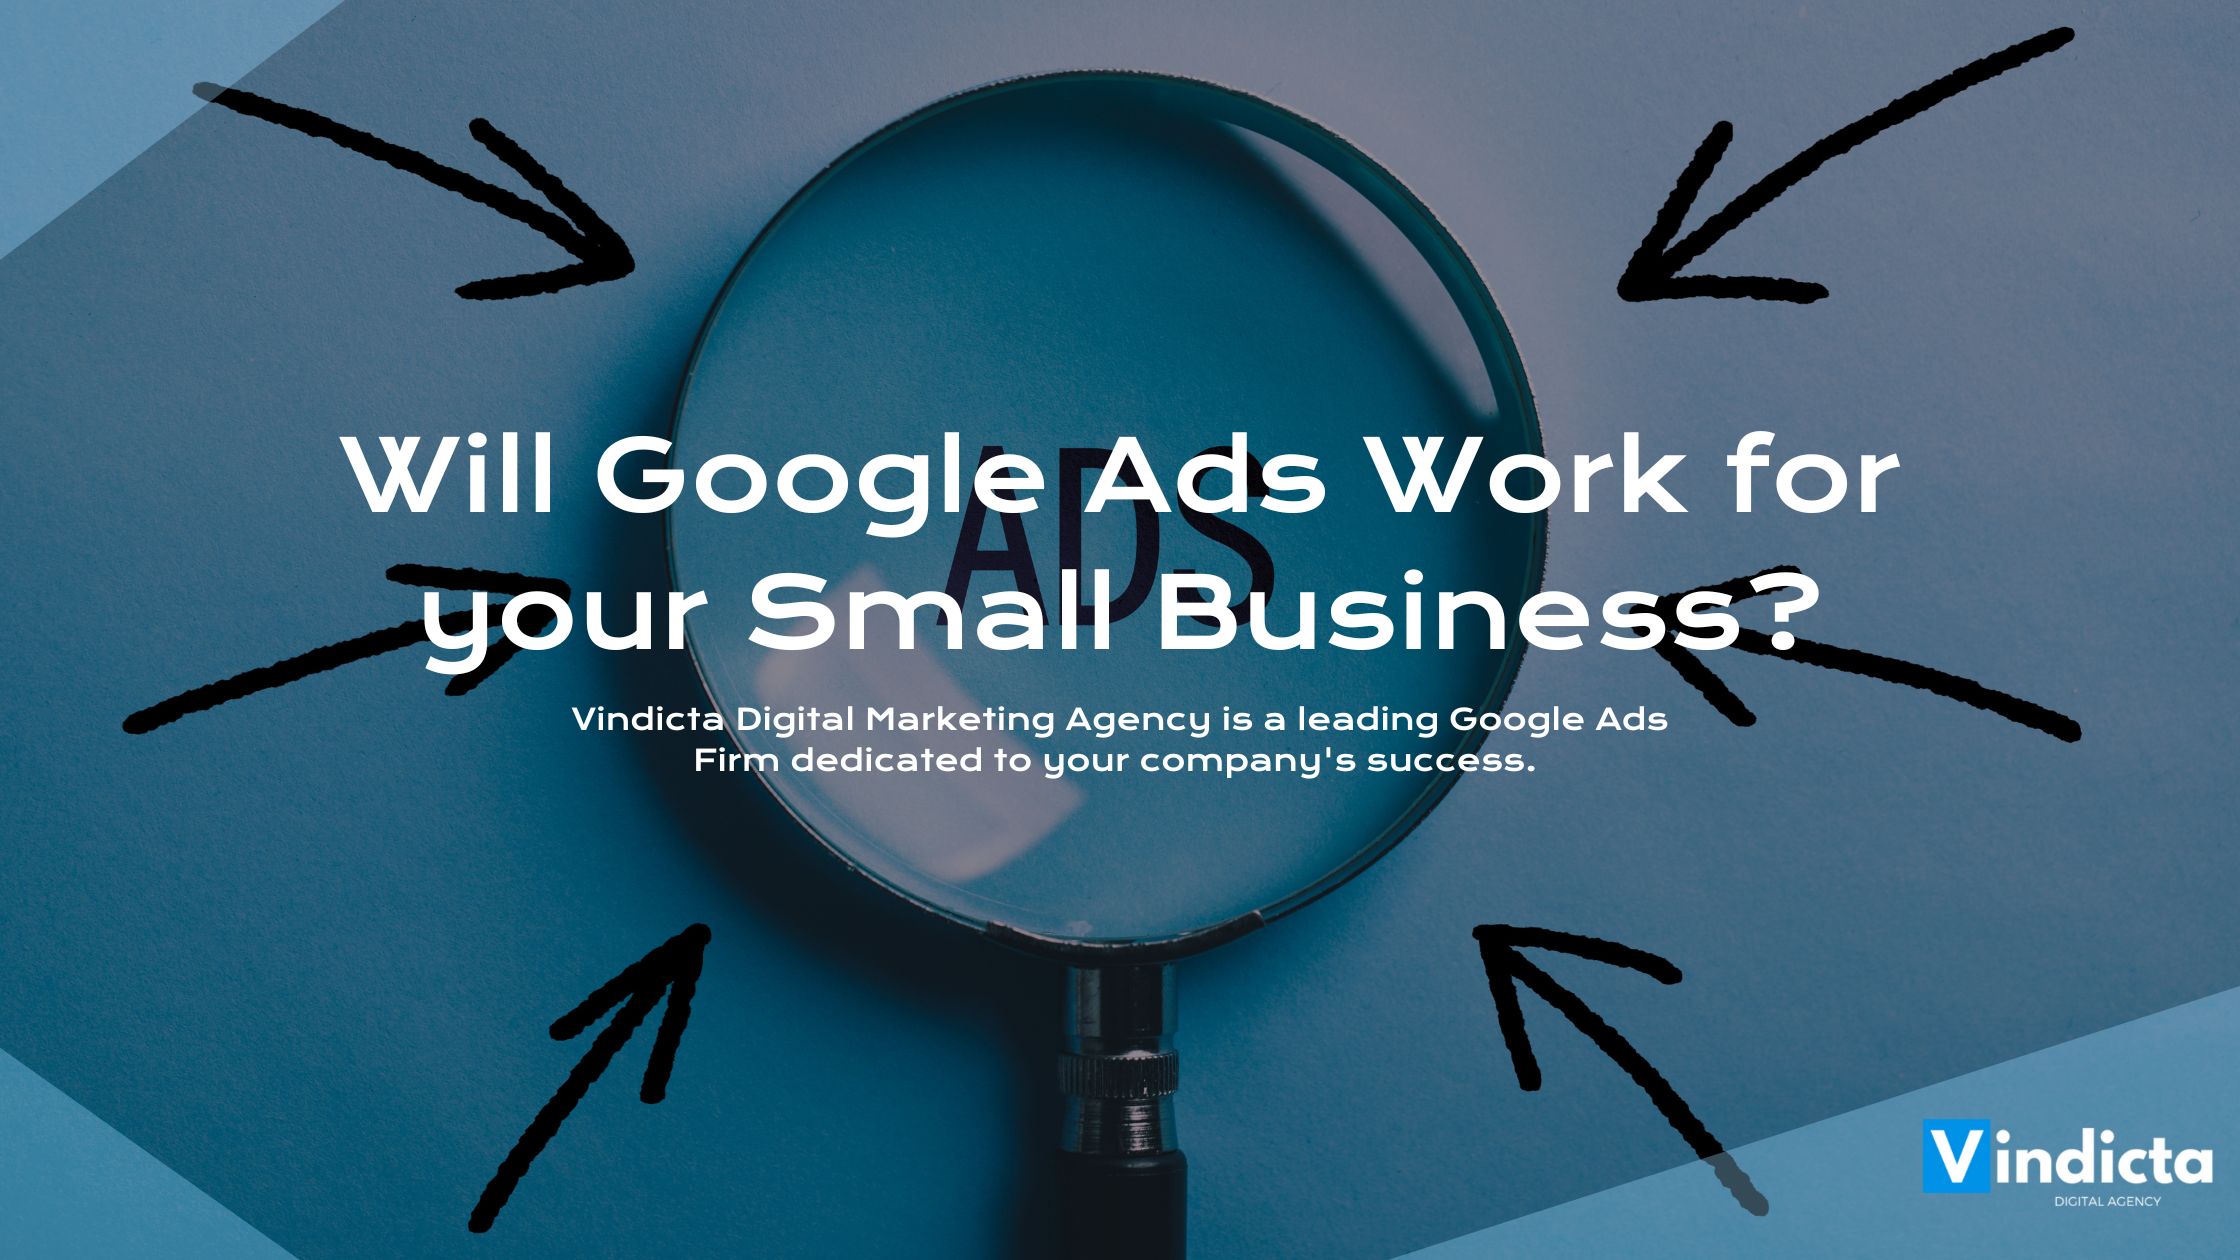 Will Google Ads Work for your Small Business?